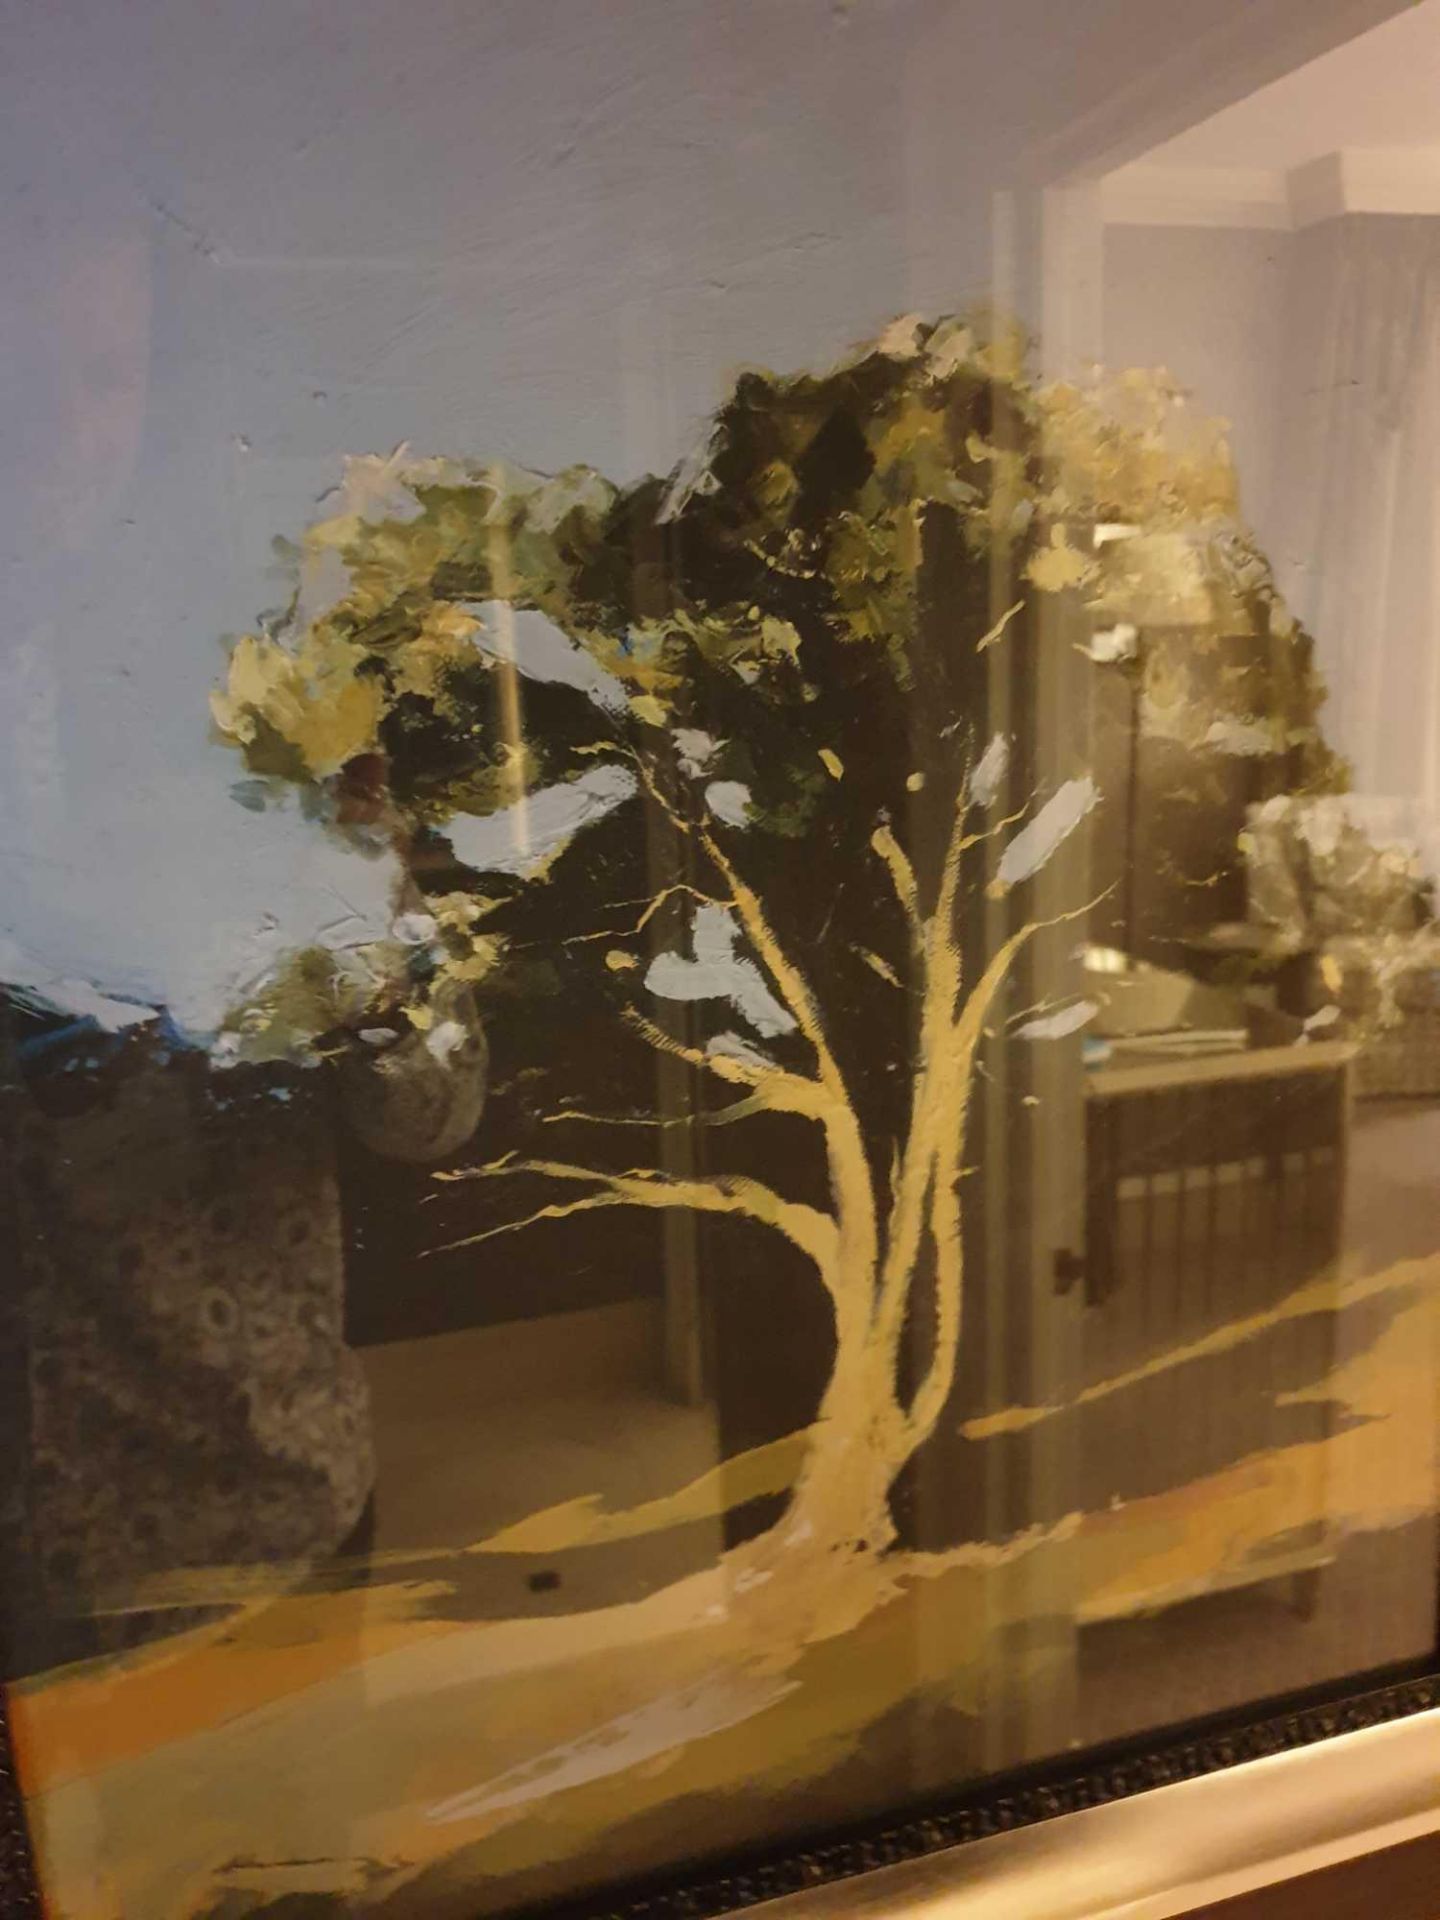 Landscape Lithograph Print Framed Depicting A Tree 62 x 76cm (Room 739) - Image 2 of 3